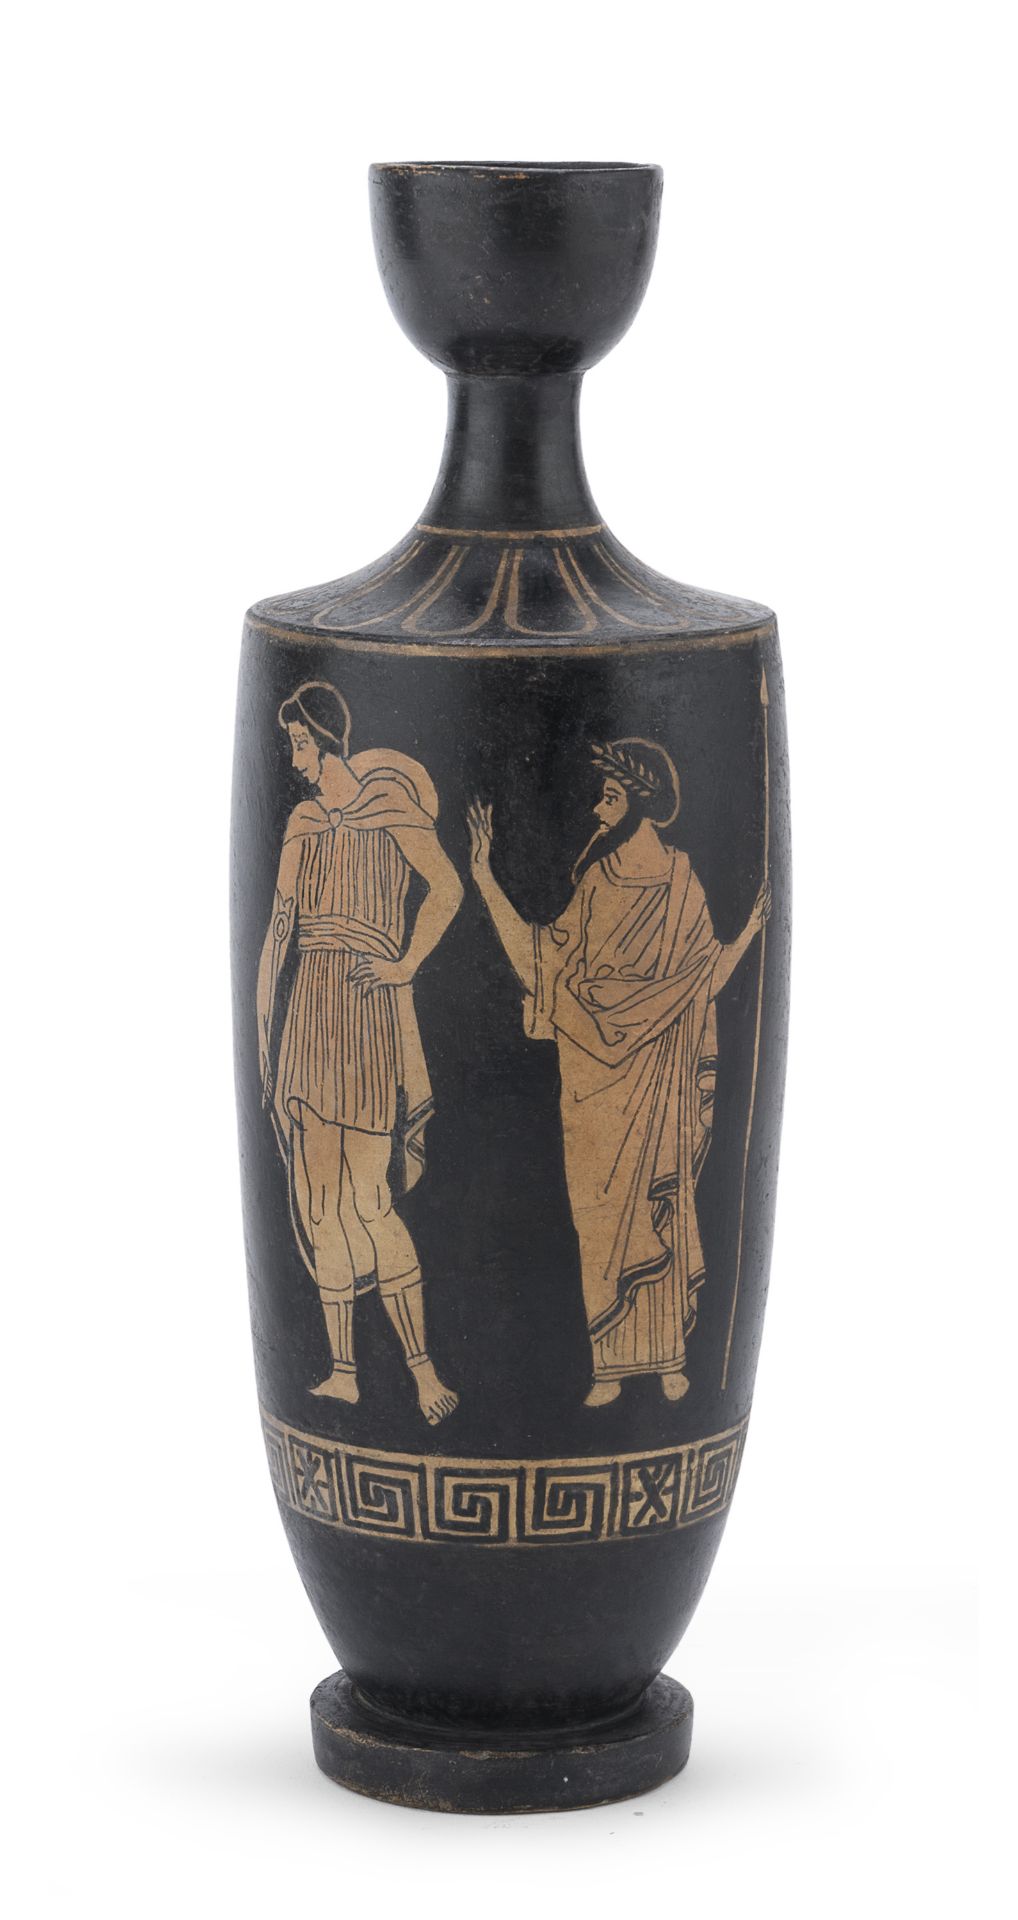 TERRACOTTA VASE ARCHAEOLOGICAL STYLE 20TH CENTURY - Image 2 of 2